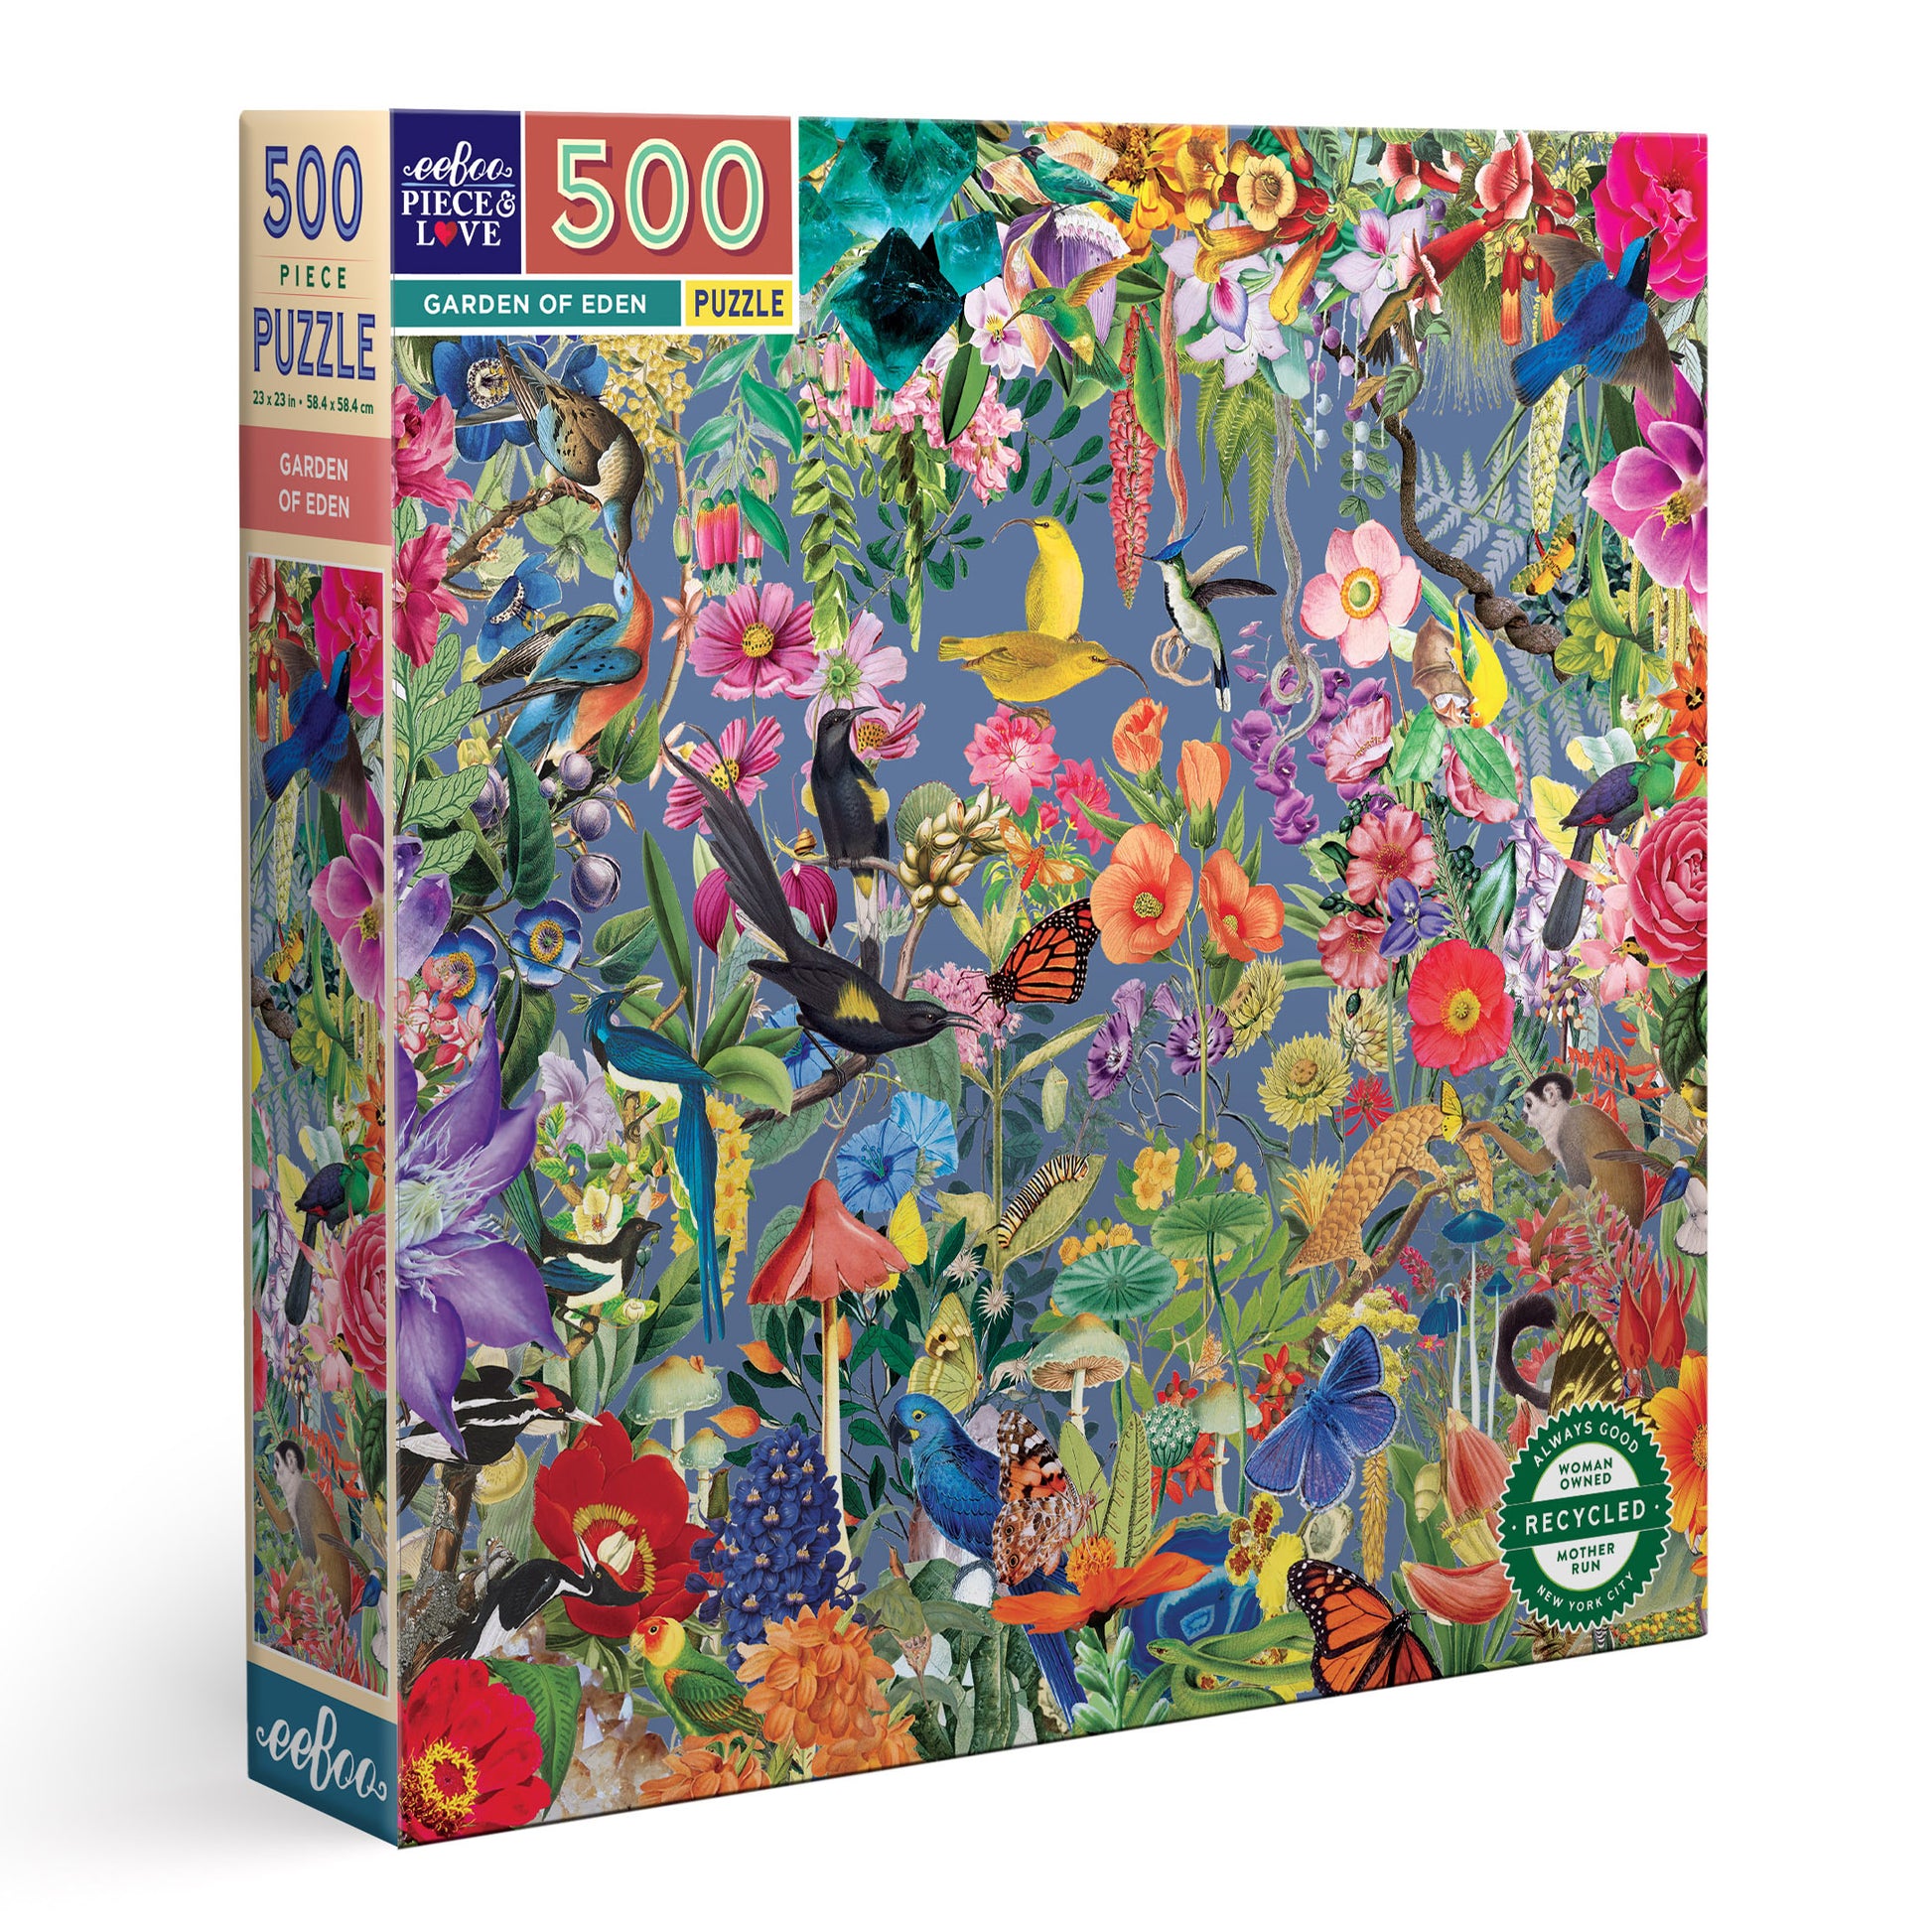 Garden of Eden 500 Piece Square Jigsaw Puzzle eeBoo Gifts for Adults 14+